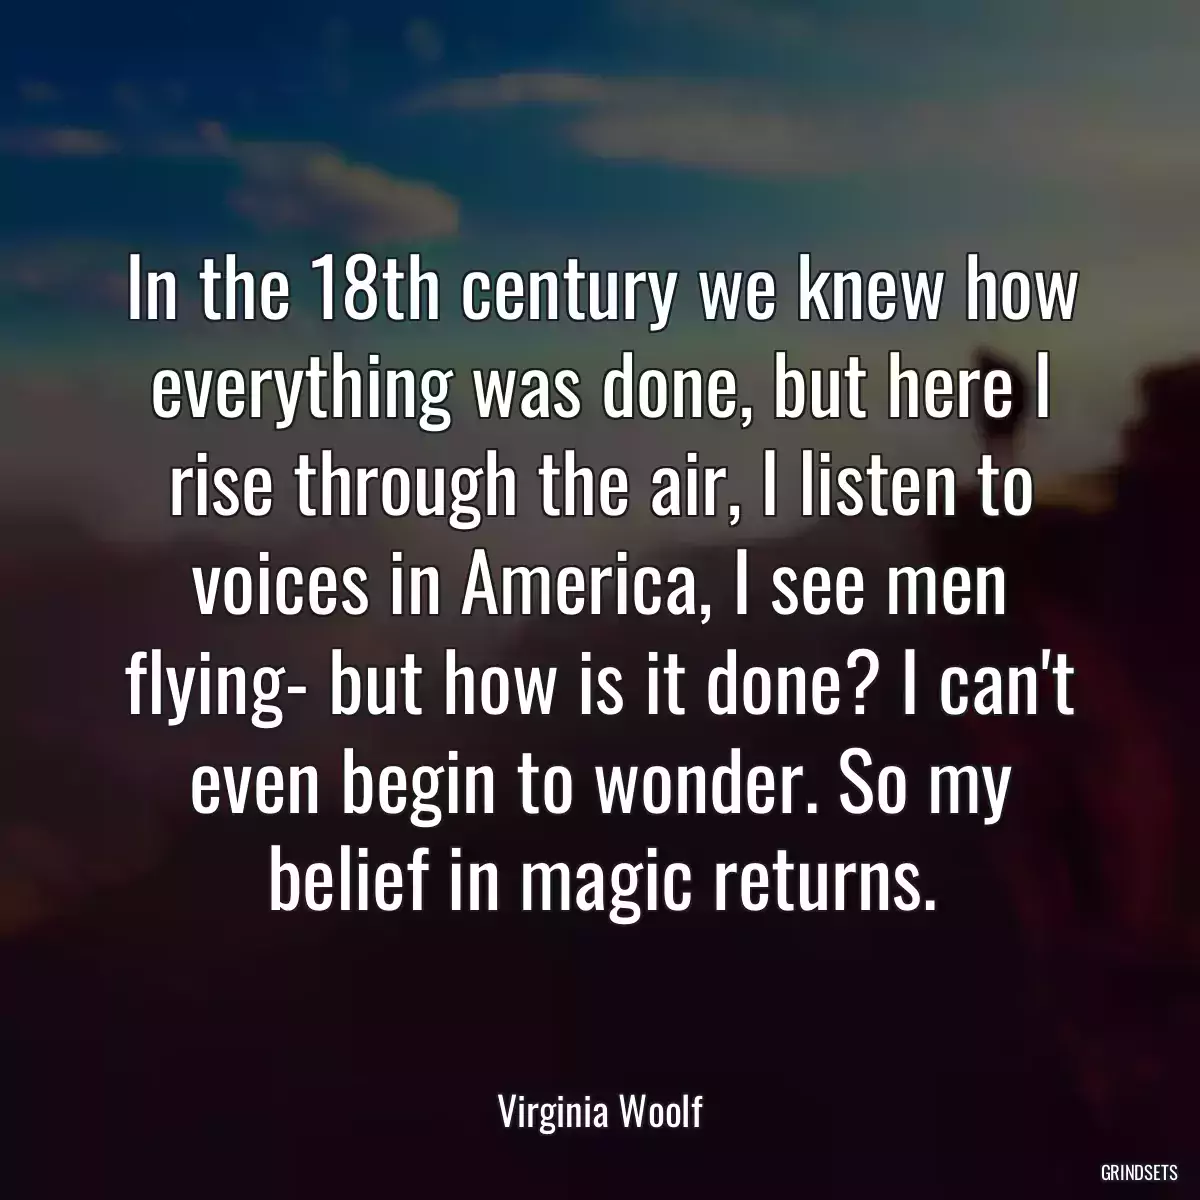 In the 18th century we knew how everything was done, but here I rise through the air, I listen to voices in America, I see men flying- but how is it done? I can\'t even begin to wonder. So my belief in magic returns.